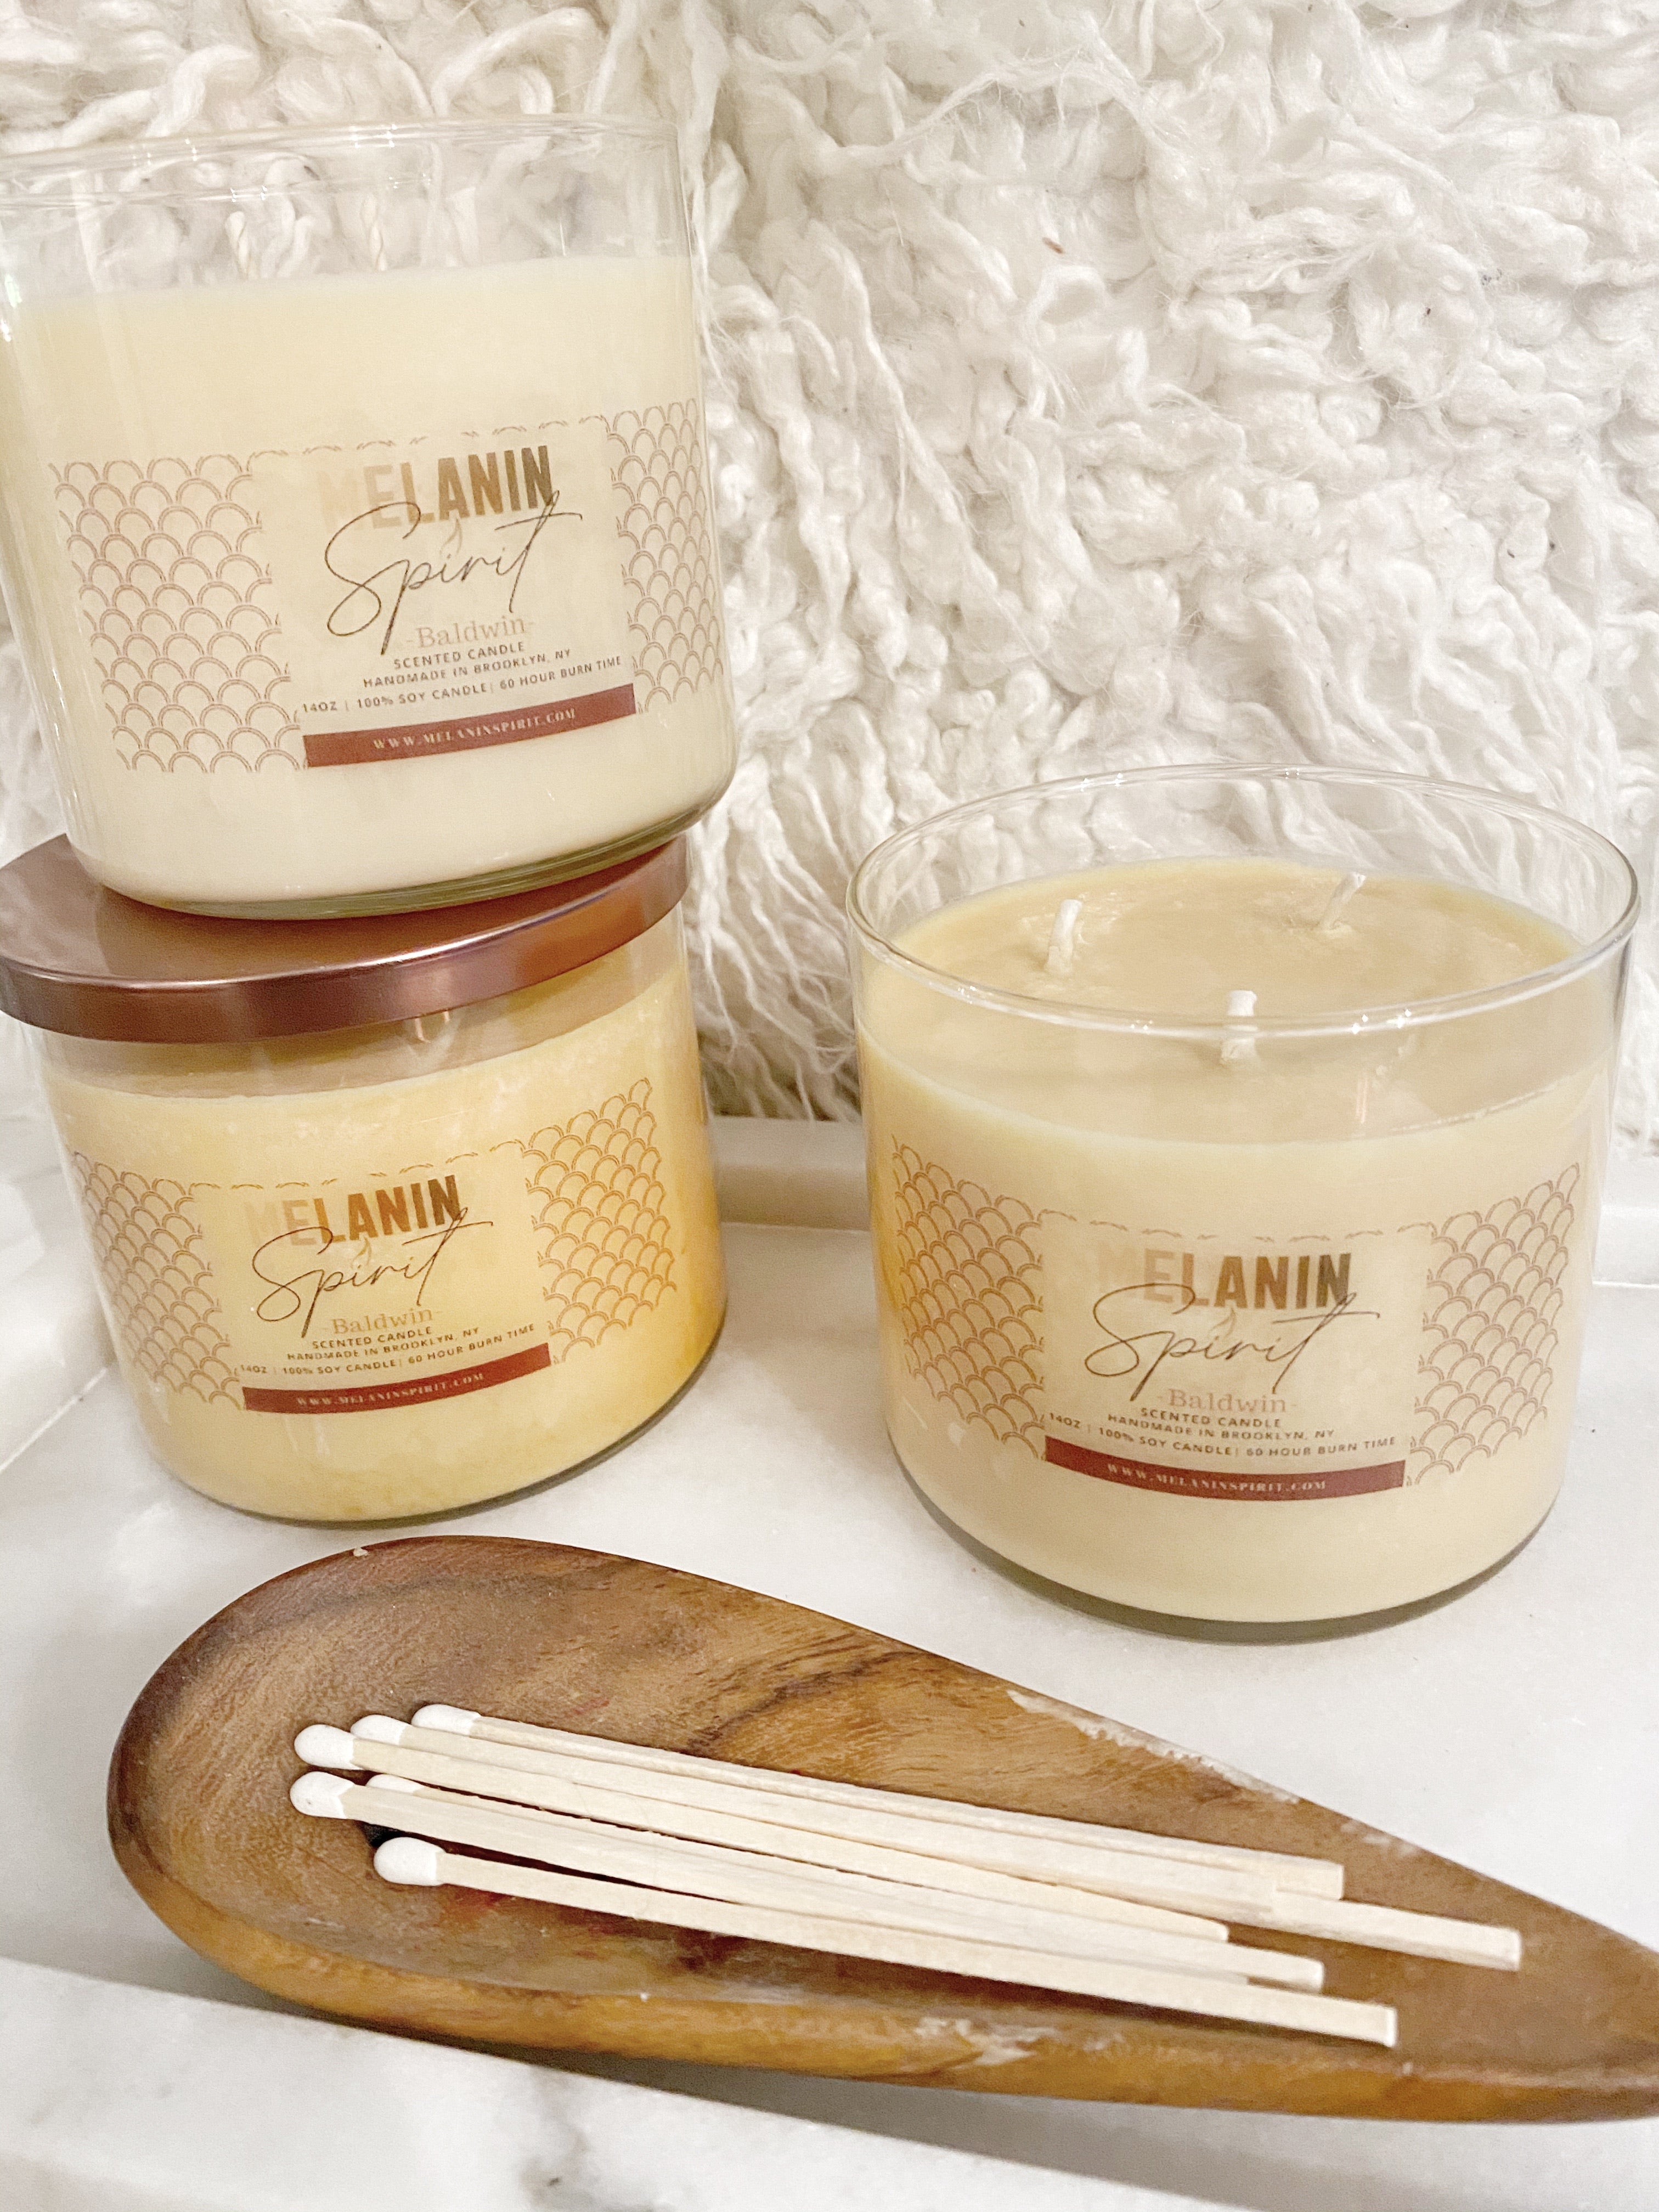 3-Wick James “Baldwin” Scented Candle